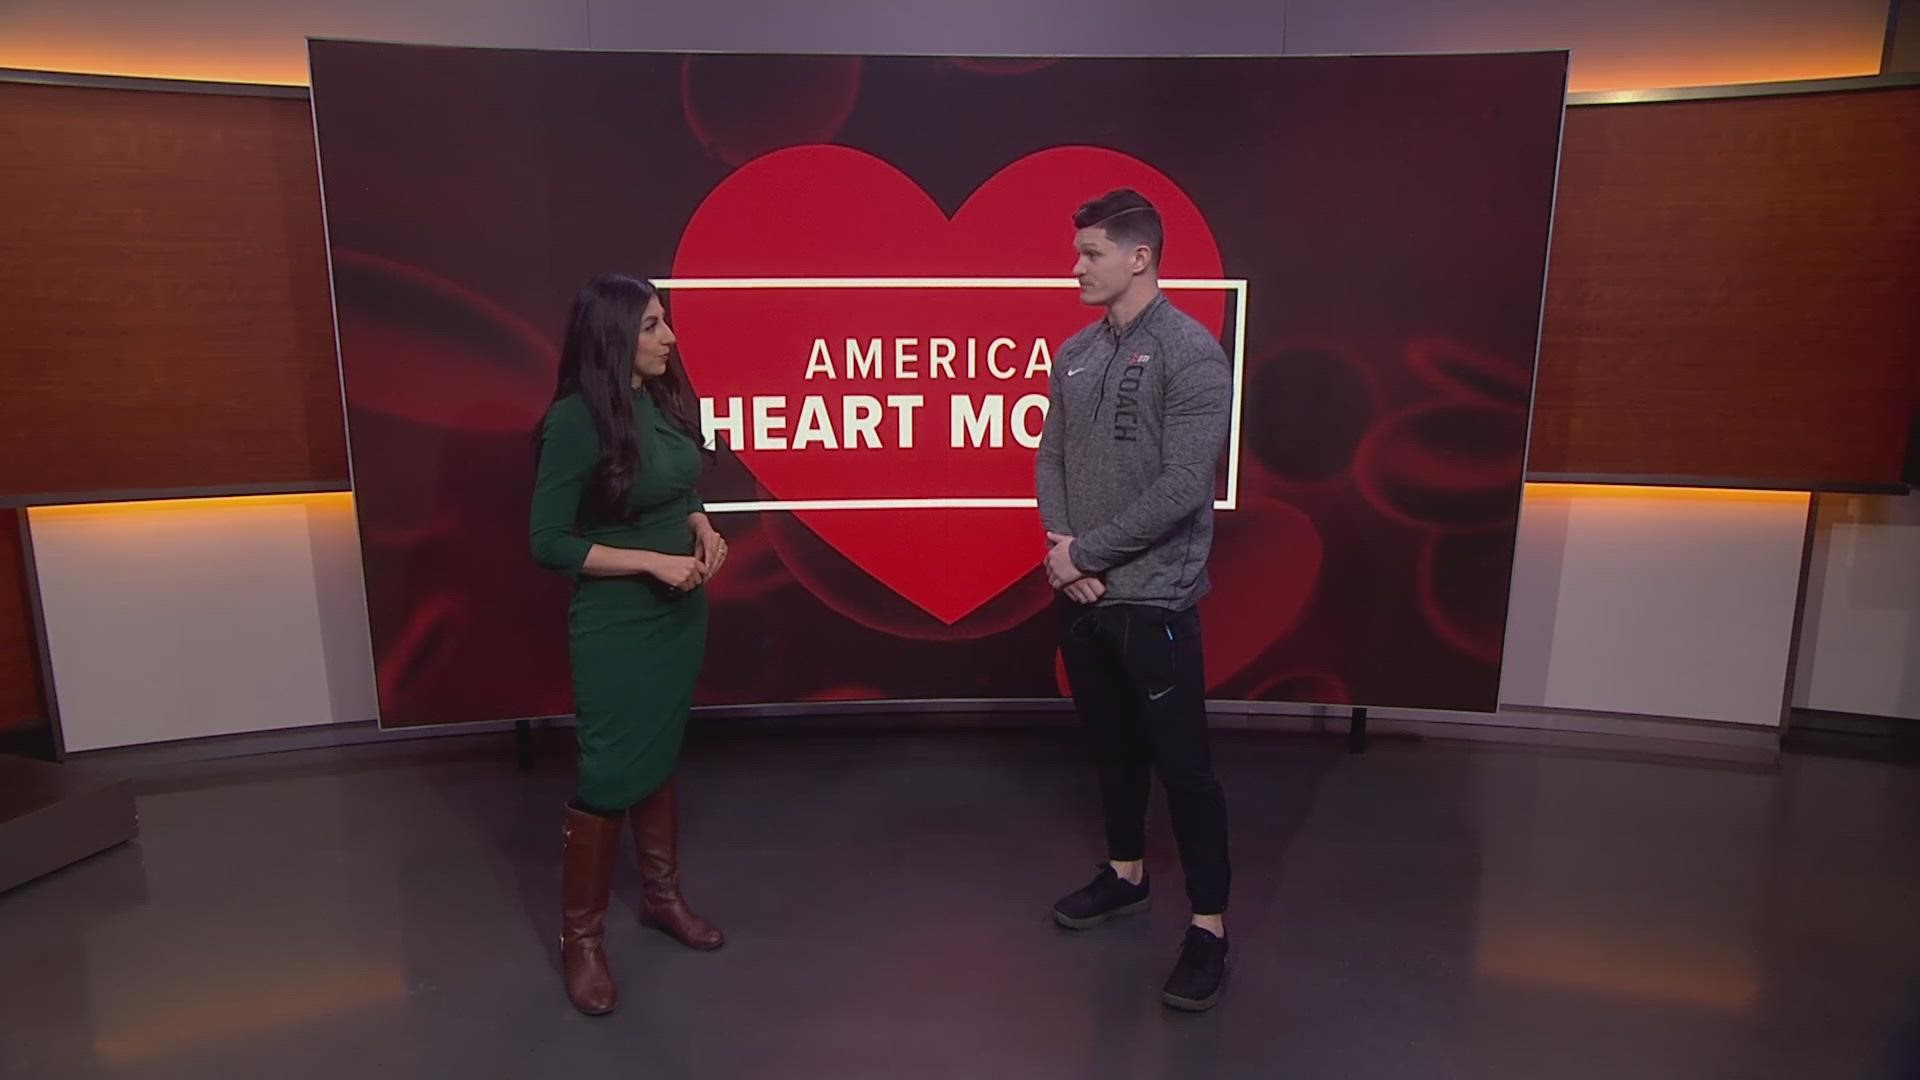 The American Heart Association recommends adults get 150 minutes of weekly physical activity. An Orangetheory Mill Creek trainer shared tips on how to meet goals.